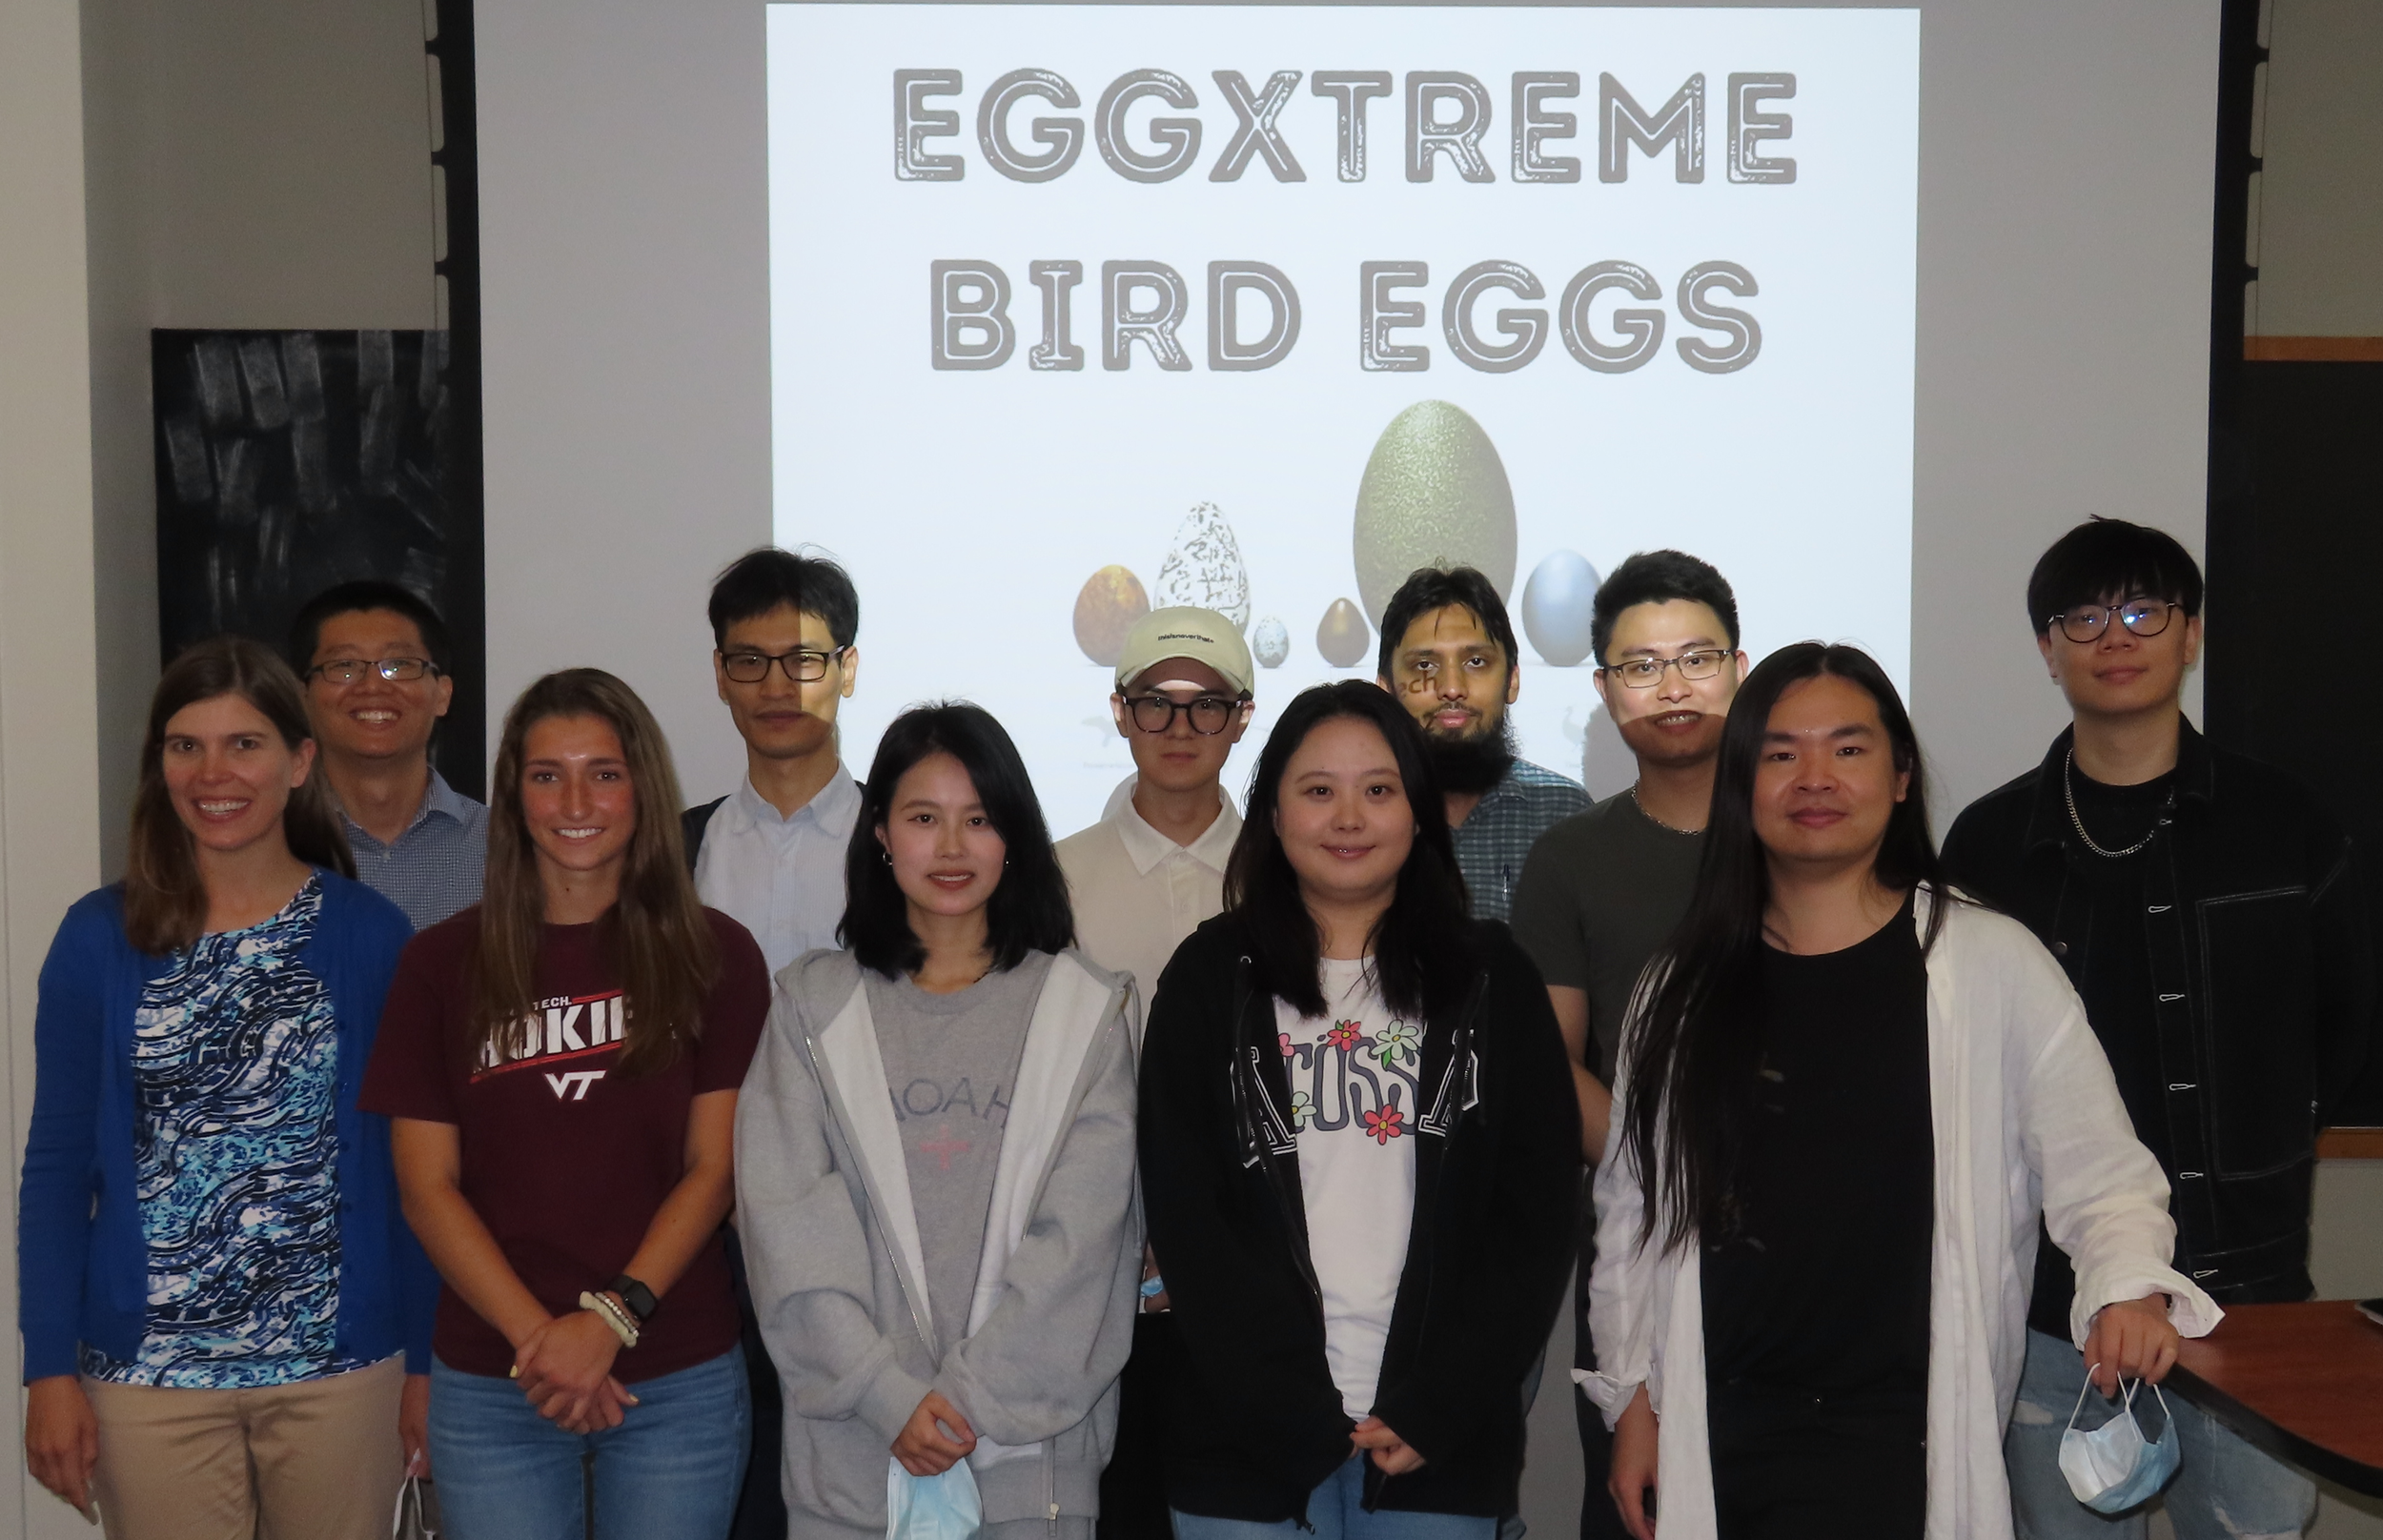 In collaboration with the Li Lab, we hosted an "Eggxtreme Bird Eggs" event at Virginia Tech.